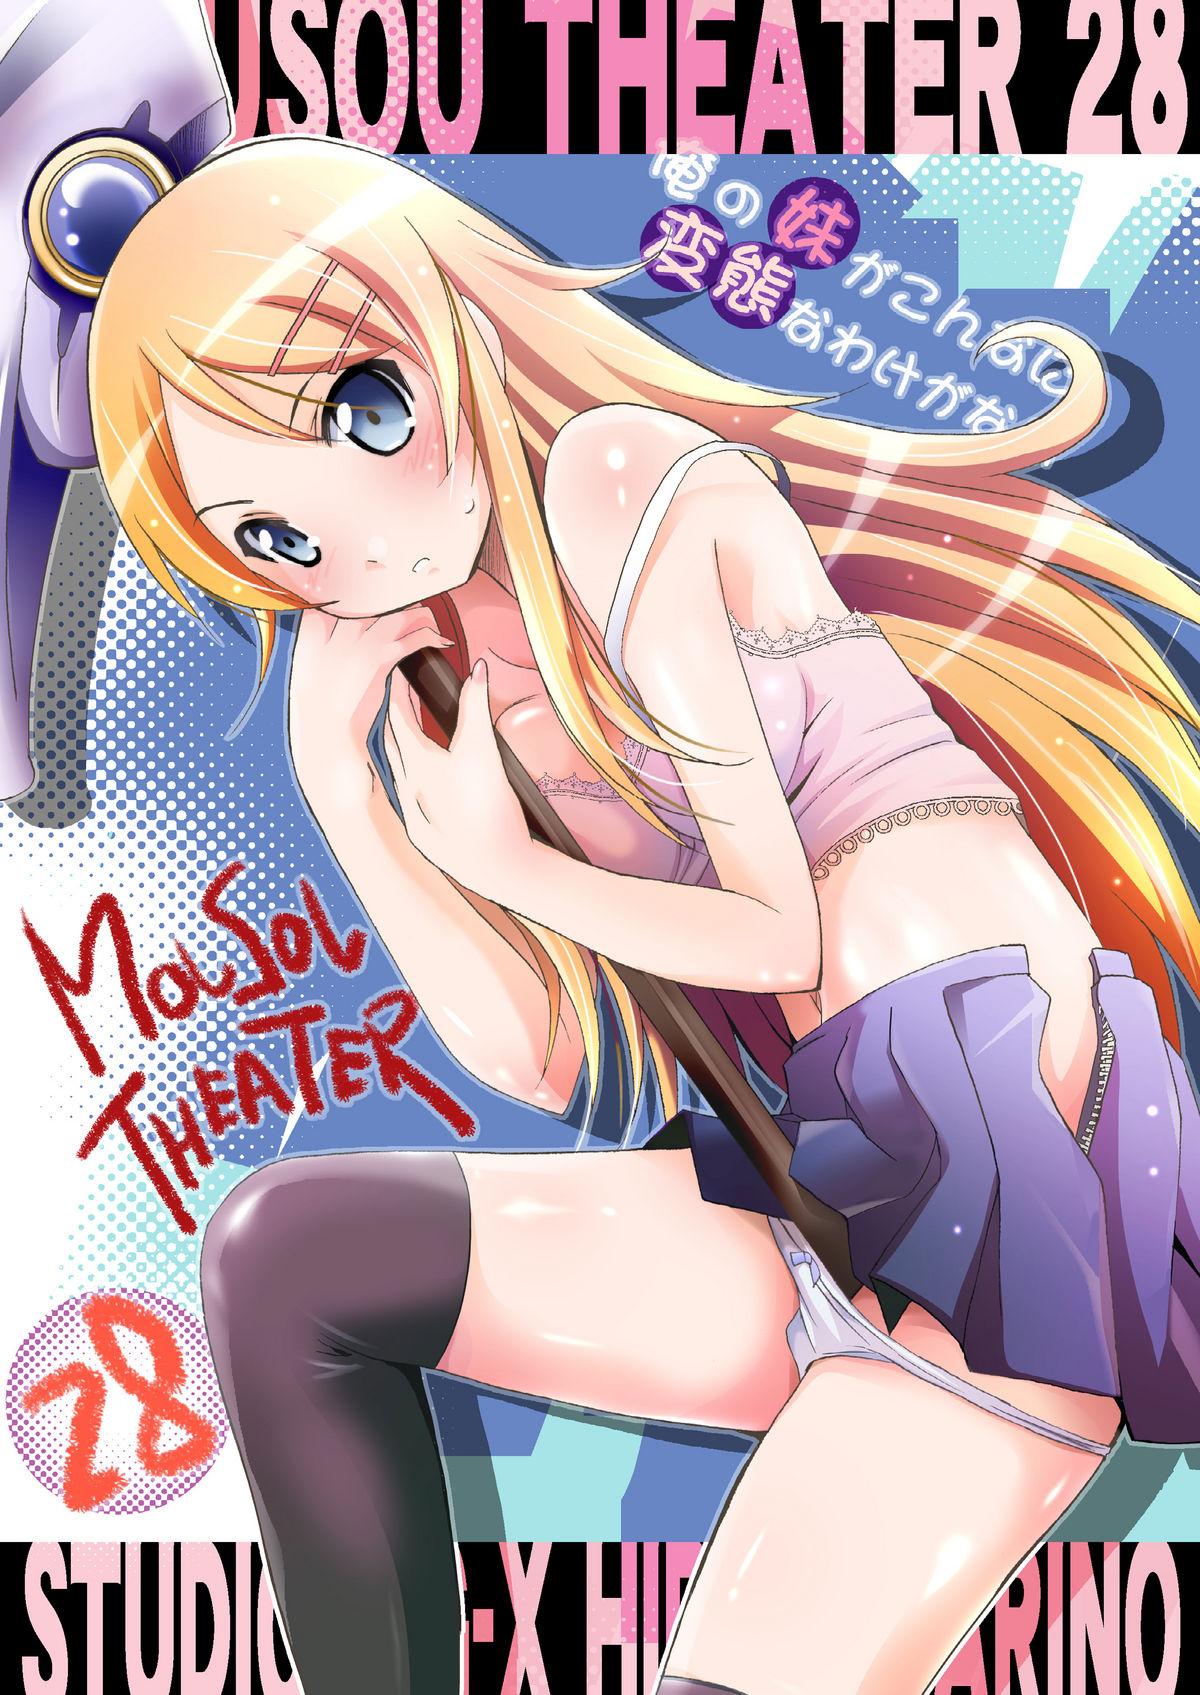 MOUSOU THEATER28 55